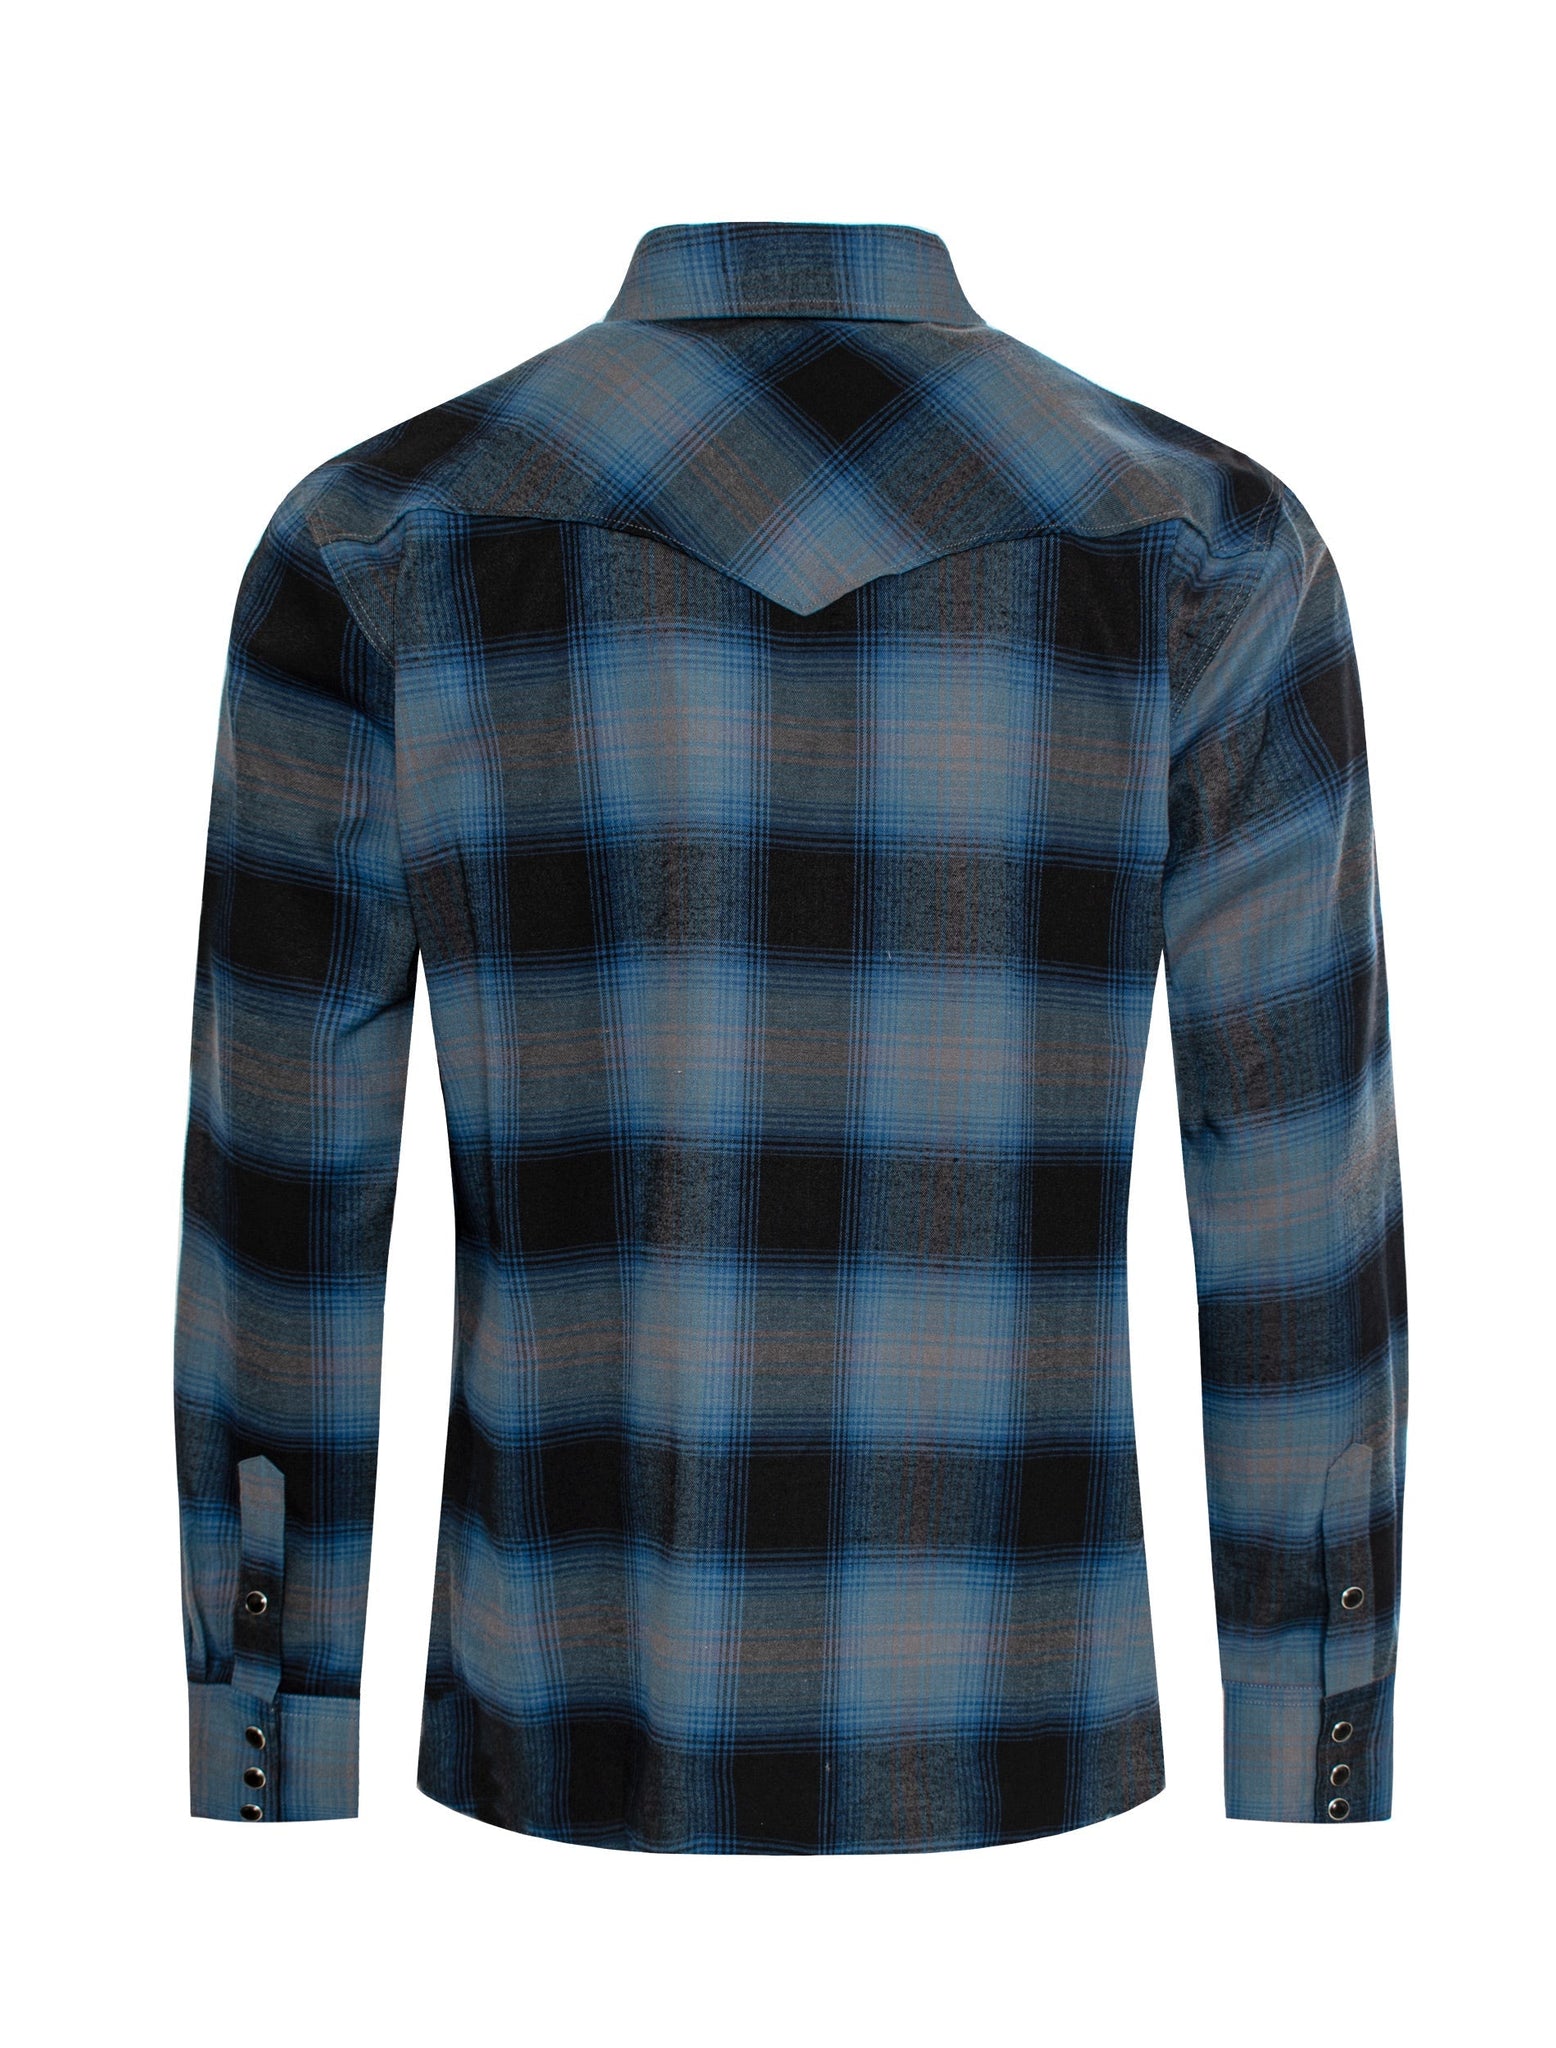 Men's Western Flannel Shirts With Snap Buttons -FLS300-303